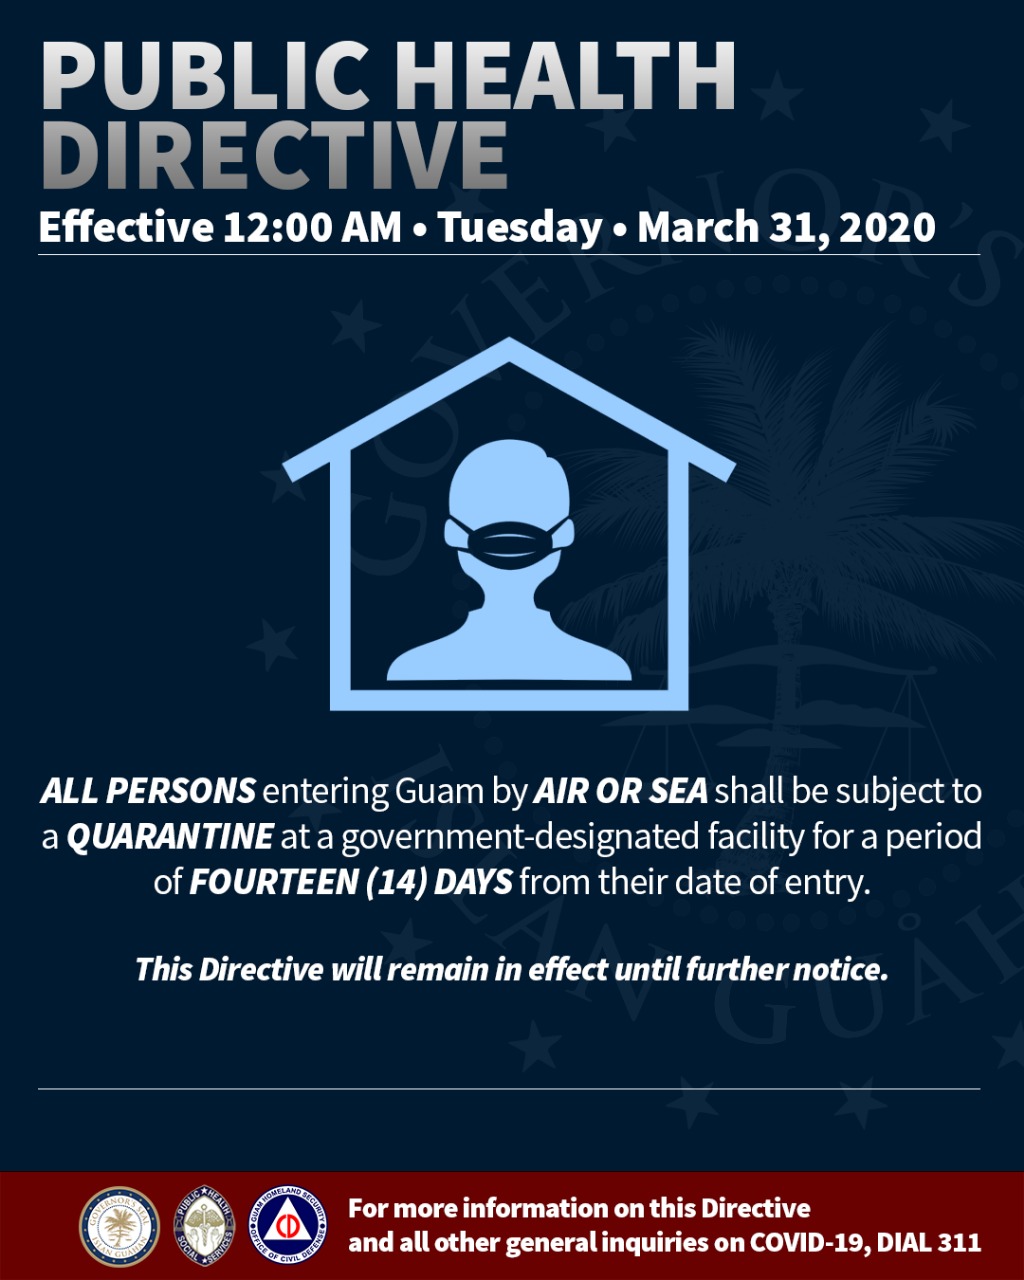 Graphic: Public Health Directive. Effective 12am on March 31, 2020. All persons entering Guam by air or sea shall be subject to a quarantine at a government-designated facility for a period of 14 days from their date of entry. This directive will remain in effect until further notice.